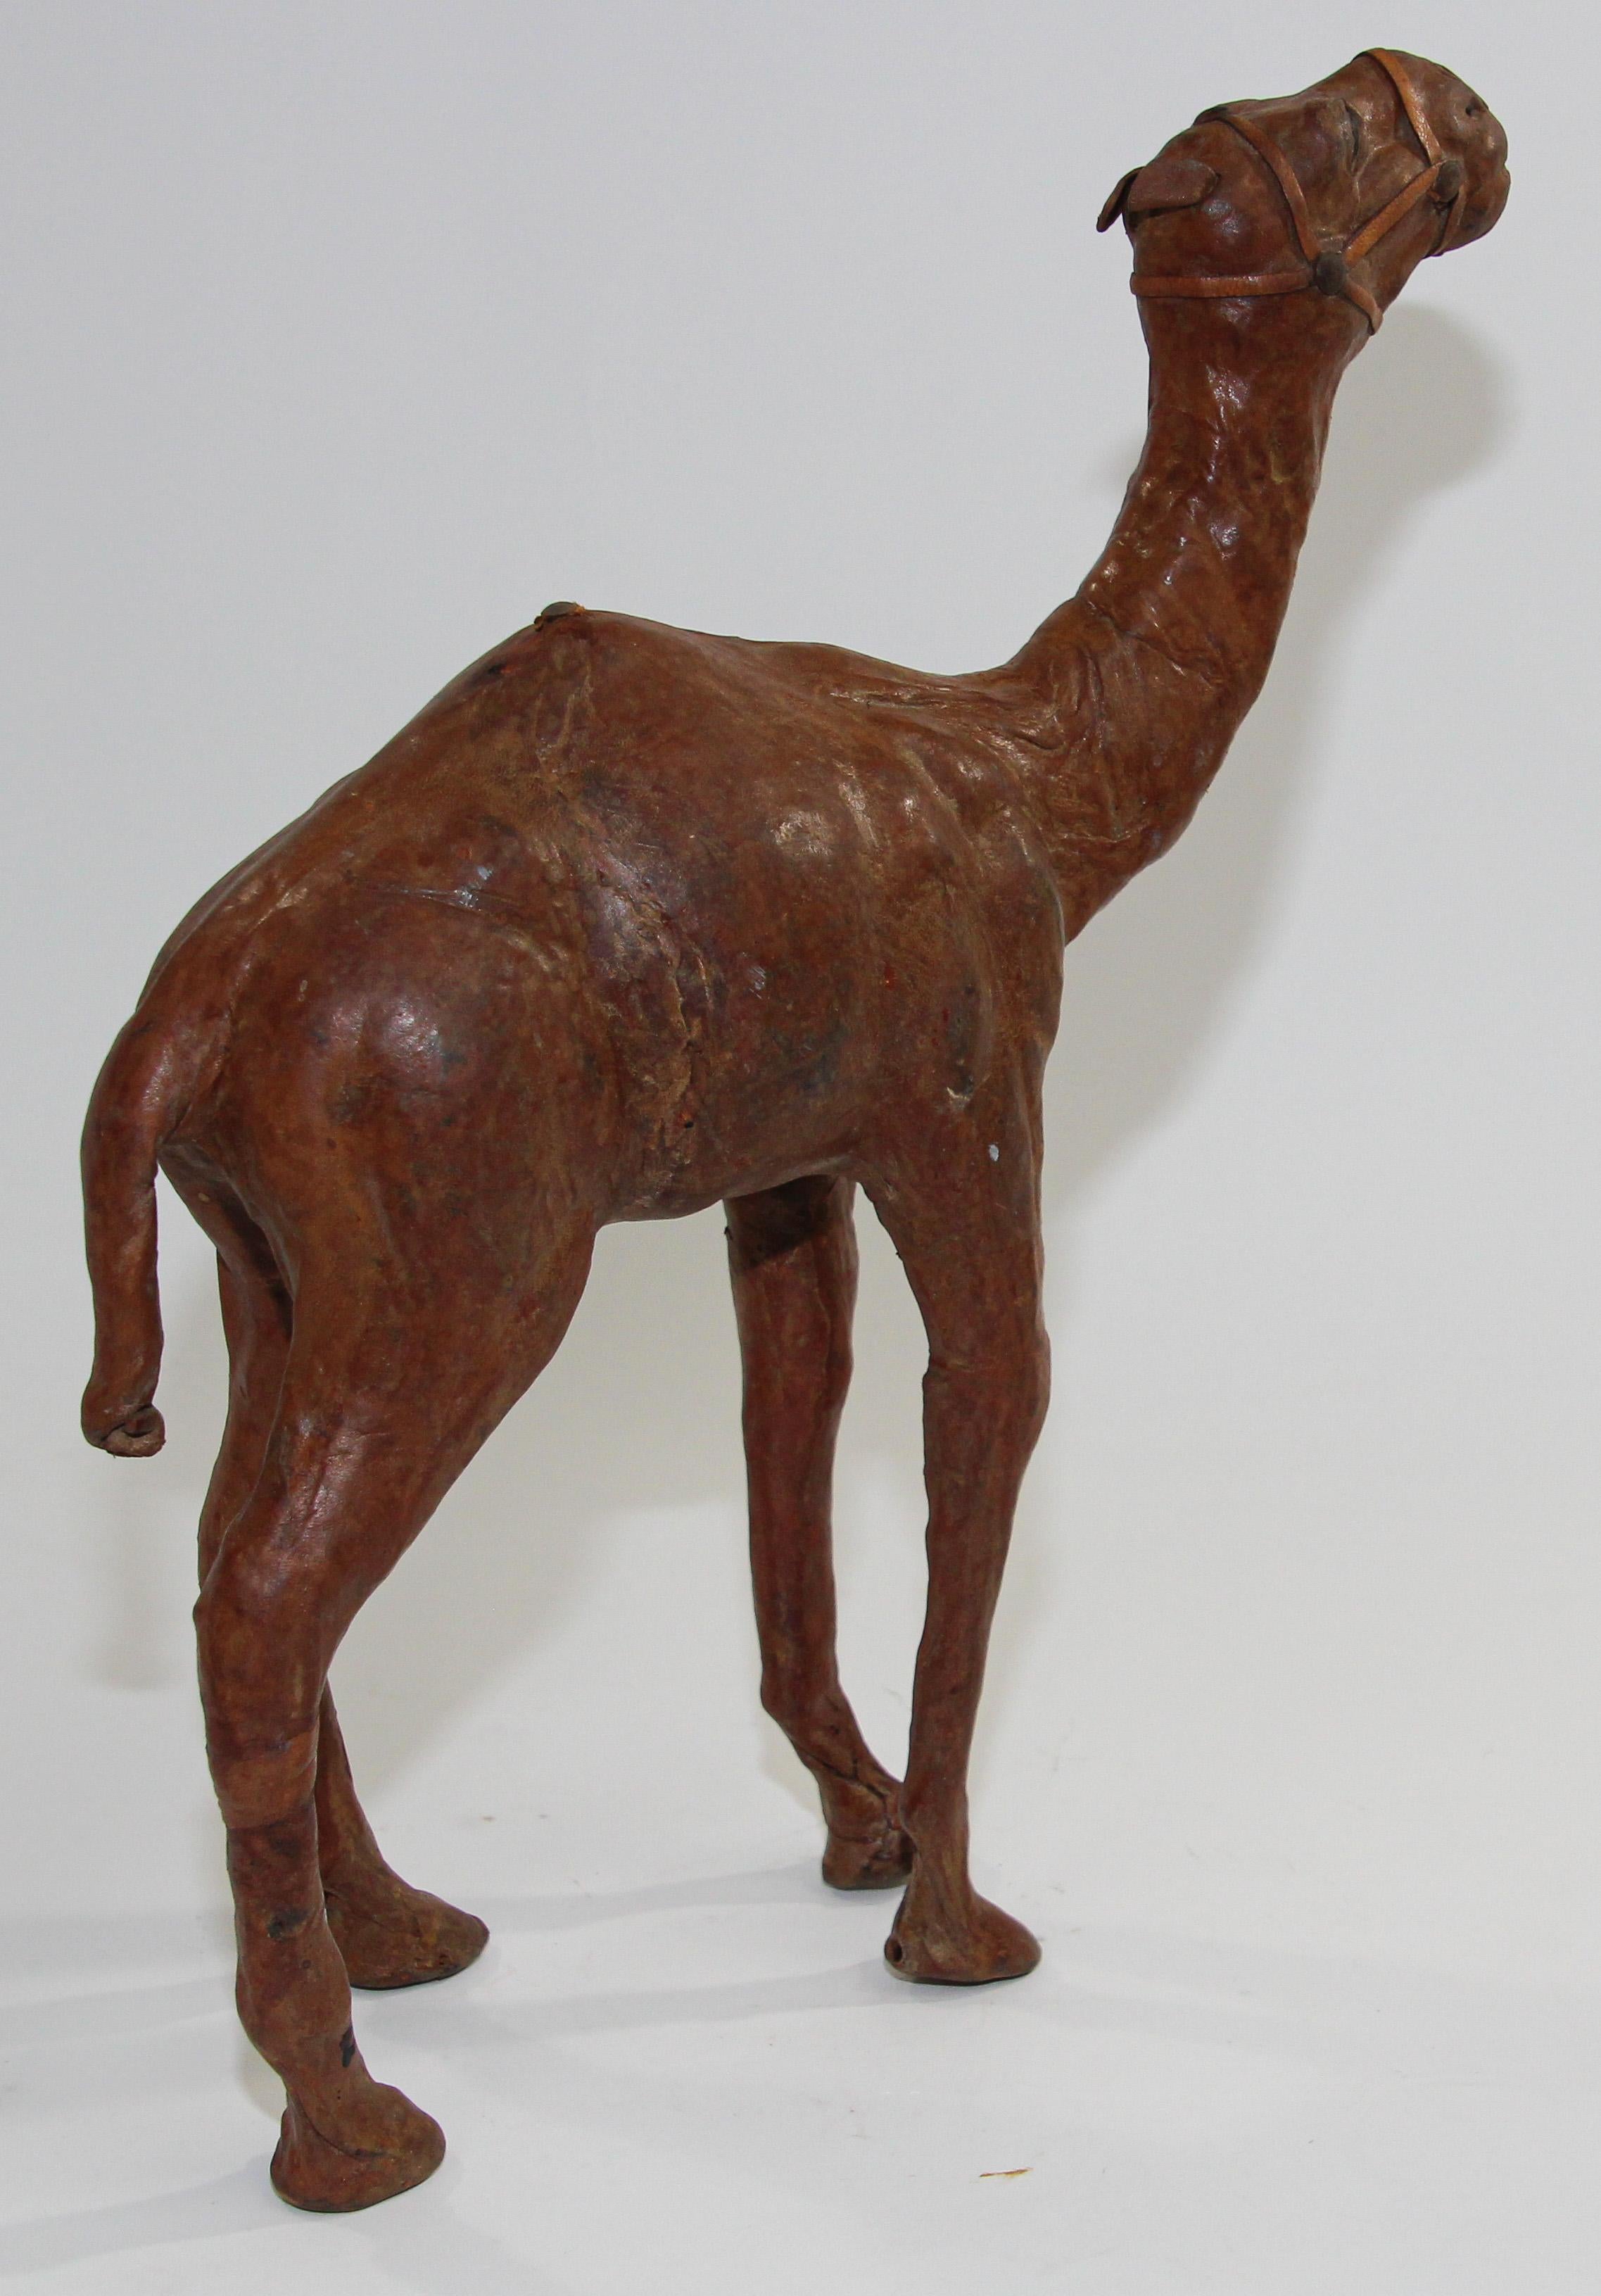 Hand-Crafted Moroccan Vintage Leather Wrapped Camel Sculpture